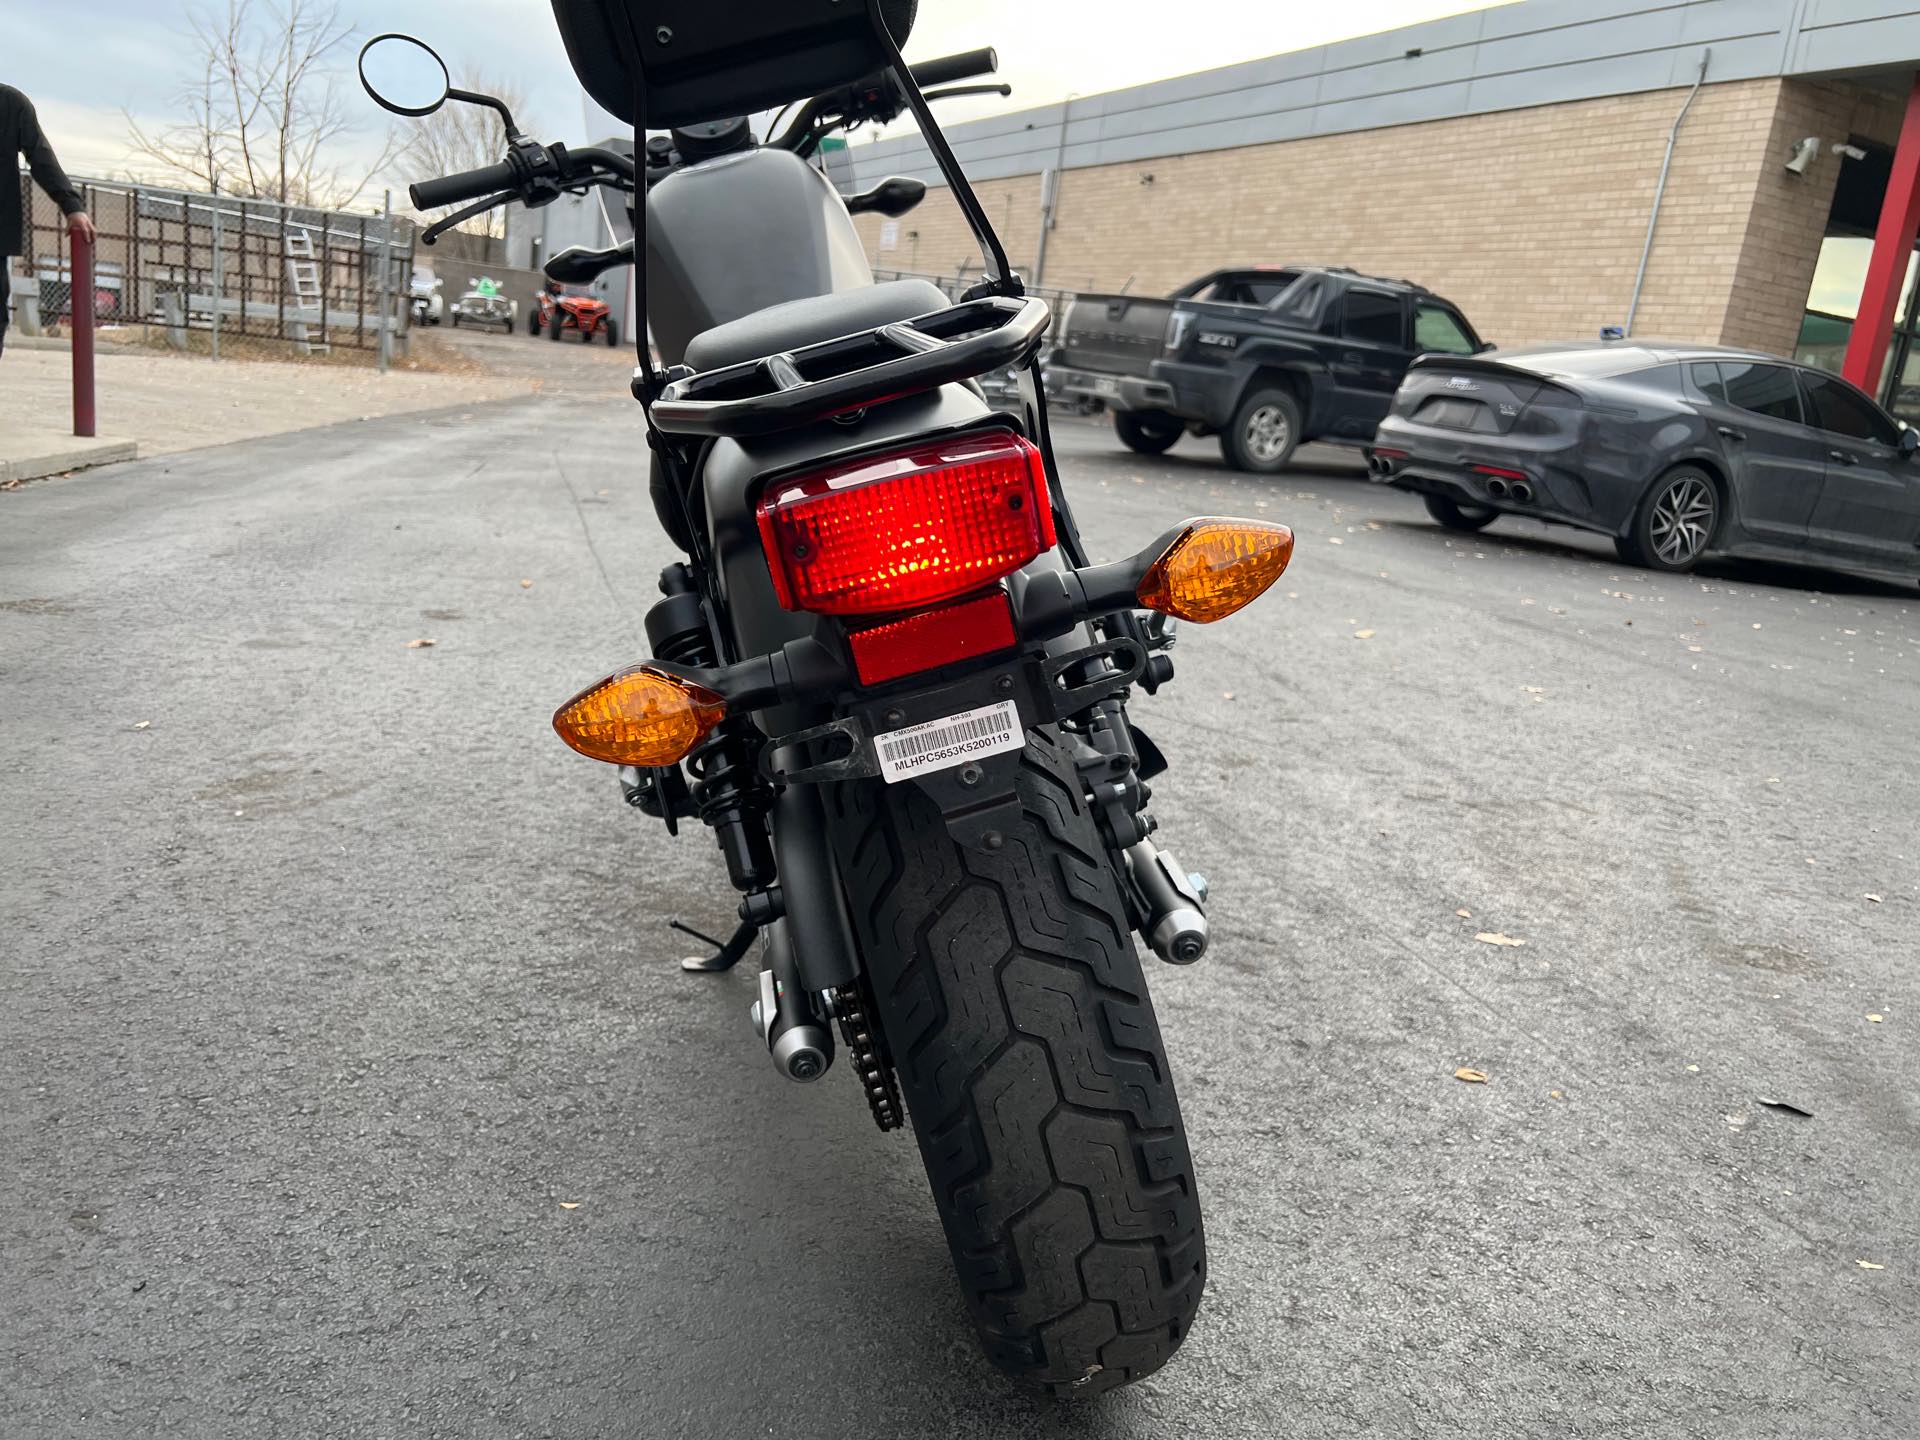 2019 Honda Rebel 500 ABS at Aces Motorcycles - Fort Collins